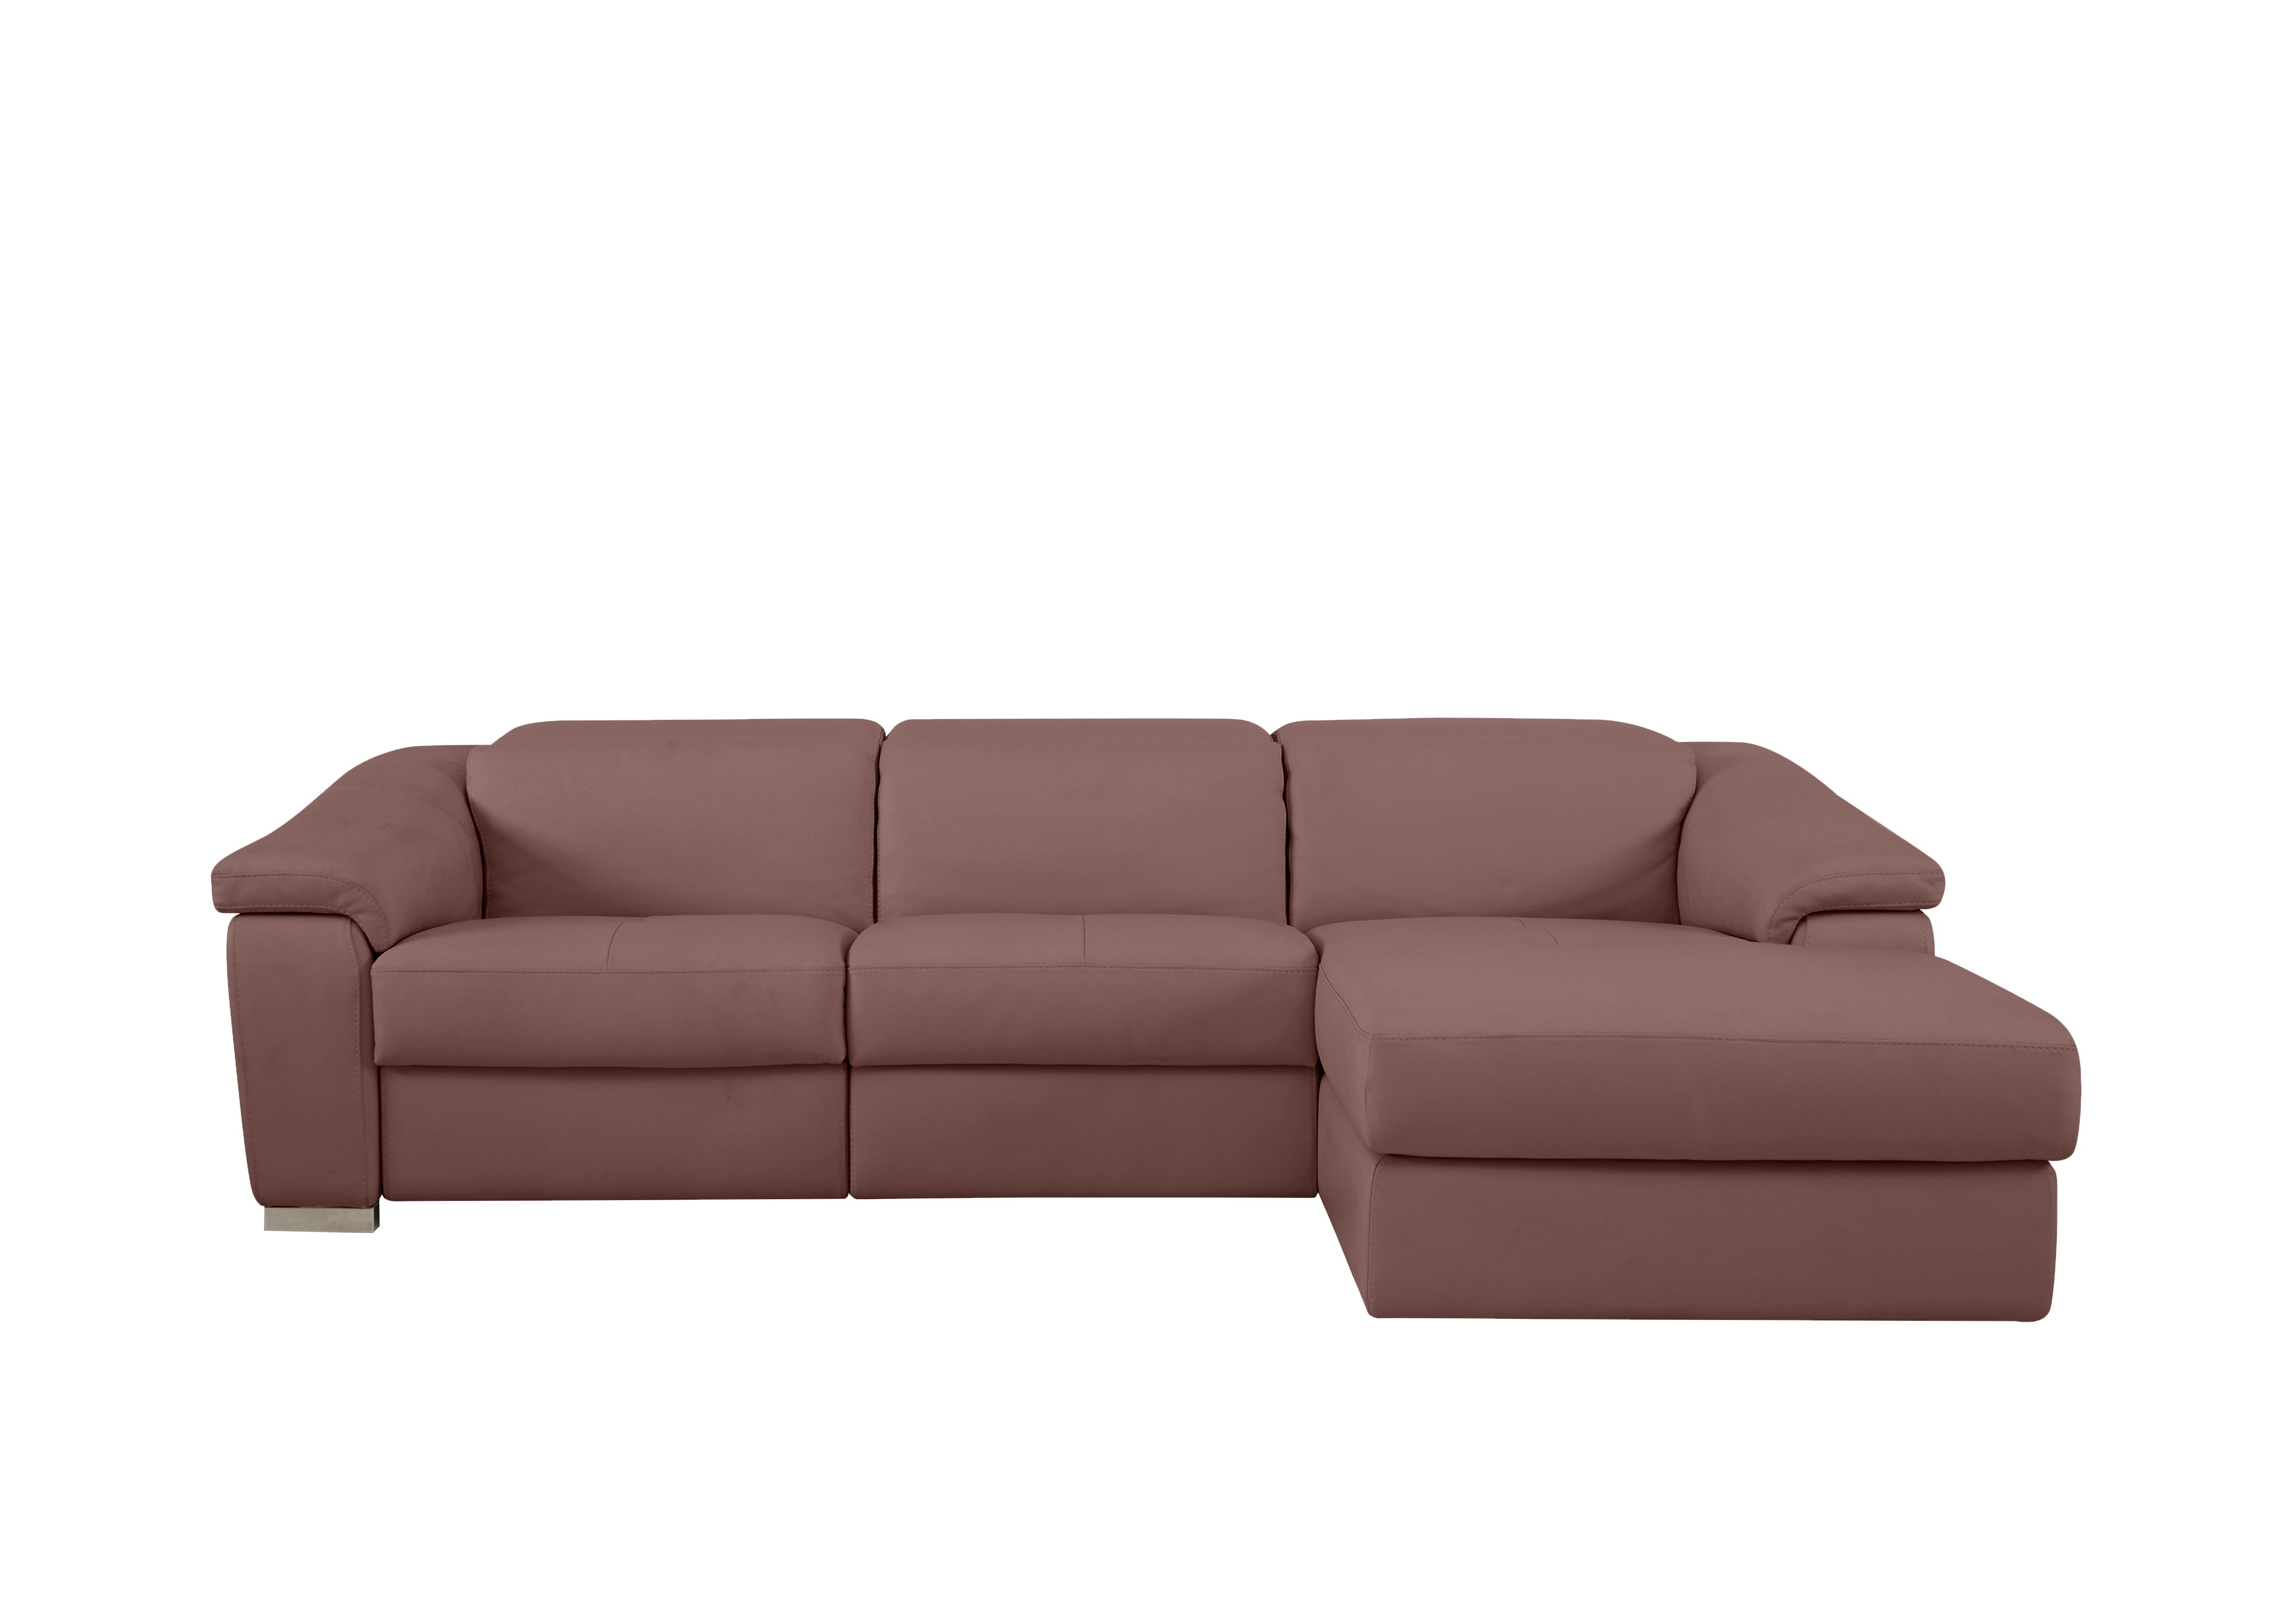 Galileo Leather Chaise End Sofa in Botero Cipria 2160 Ch on Furniture Village